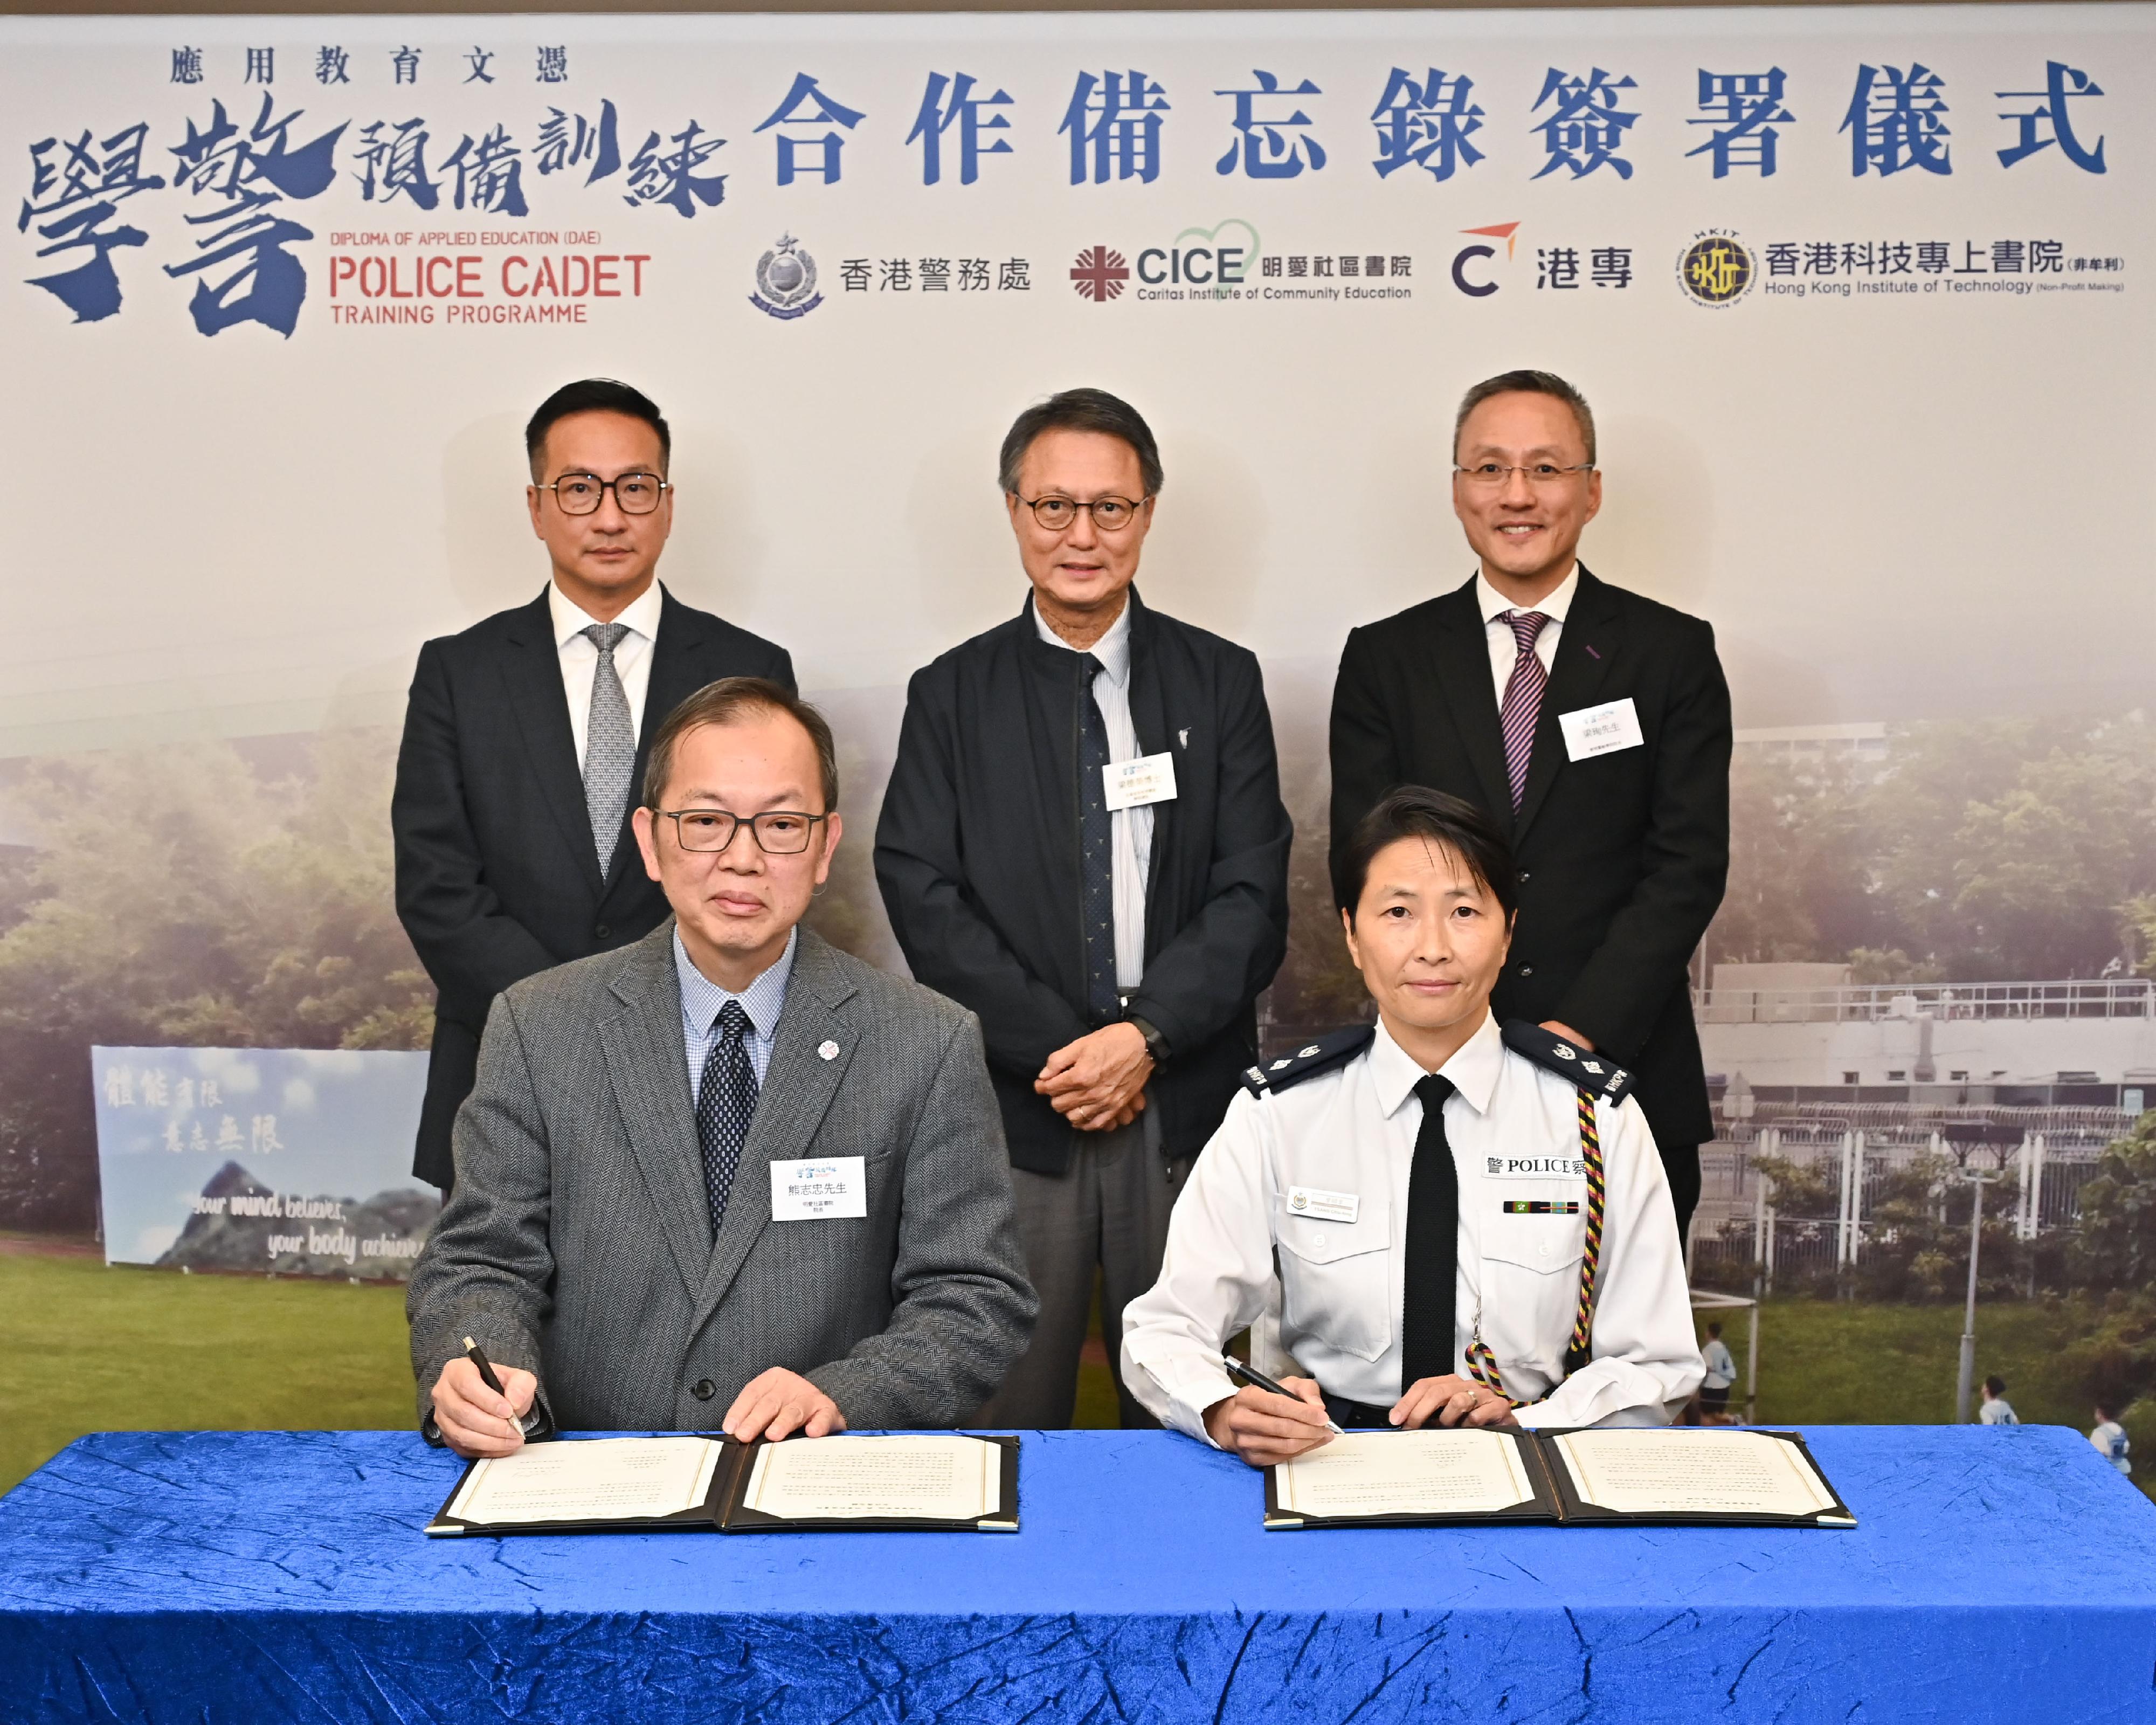 The Hong Kong Police College announced today (January 19) that it will co-organise the “Diploma of Applied Education - Police Cadet Training” Programme with Caritas Institute of Community Education (CICE), Hong Kong College of Technology and Hong Kong Institute of Technology in the 2024/25 academic year. Witnessed by the Assistant Commissioner of Police (Personnel), Mr Chan Man-tak (back row, first left); Acting Director of the Hong Kong Police College, Mr Leung Shun (back row, first right), and Programme Director of Diploma of Applied Education of the Federation for Self-financing Tertiary Education, Dr Simon Leung (back row, centre), the Senior Superintendent of Police, School of Foundation Training, Ms Tsang Chiu-tong (front row, right), signed the Memorandum of Understanding with the Principal of CICE, Mr Hung Chi-chung (front row, left).